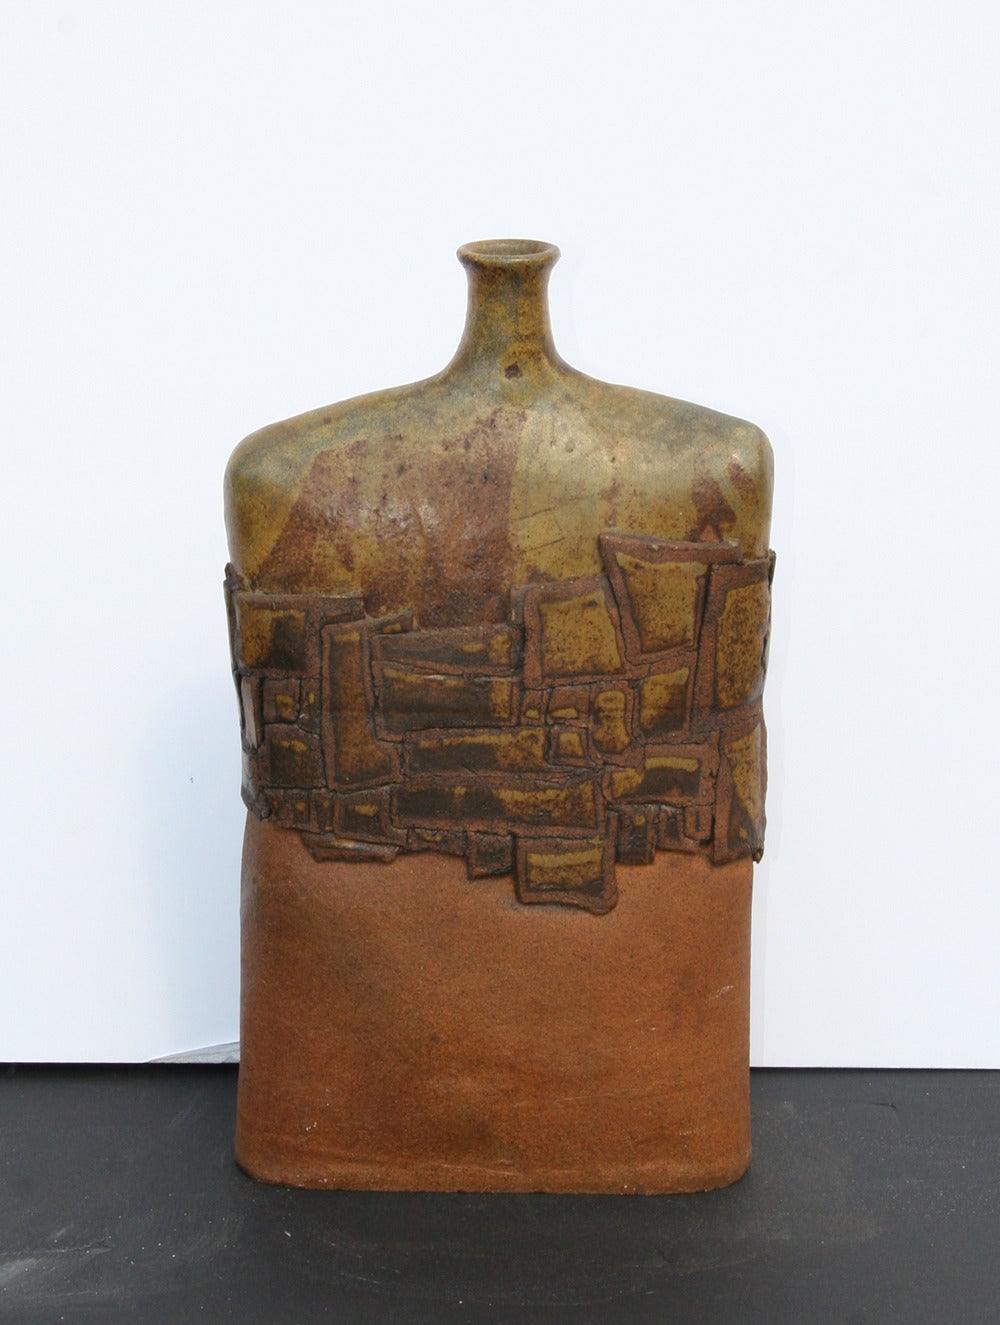 This ceramic sculpture is circa 1970 and offers an expressionistic view of a large flask.  The geometric abstract pattern that separates the two tones lends a modern element to a classic design.

Artist:	Shamel?
Title:	Flask
Year: circa